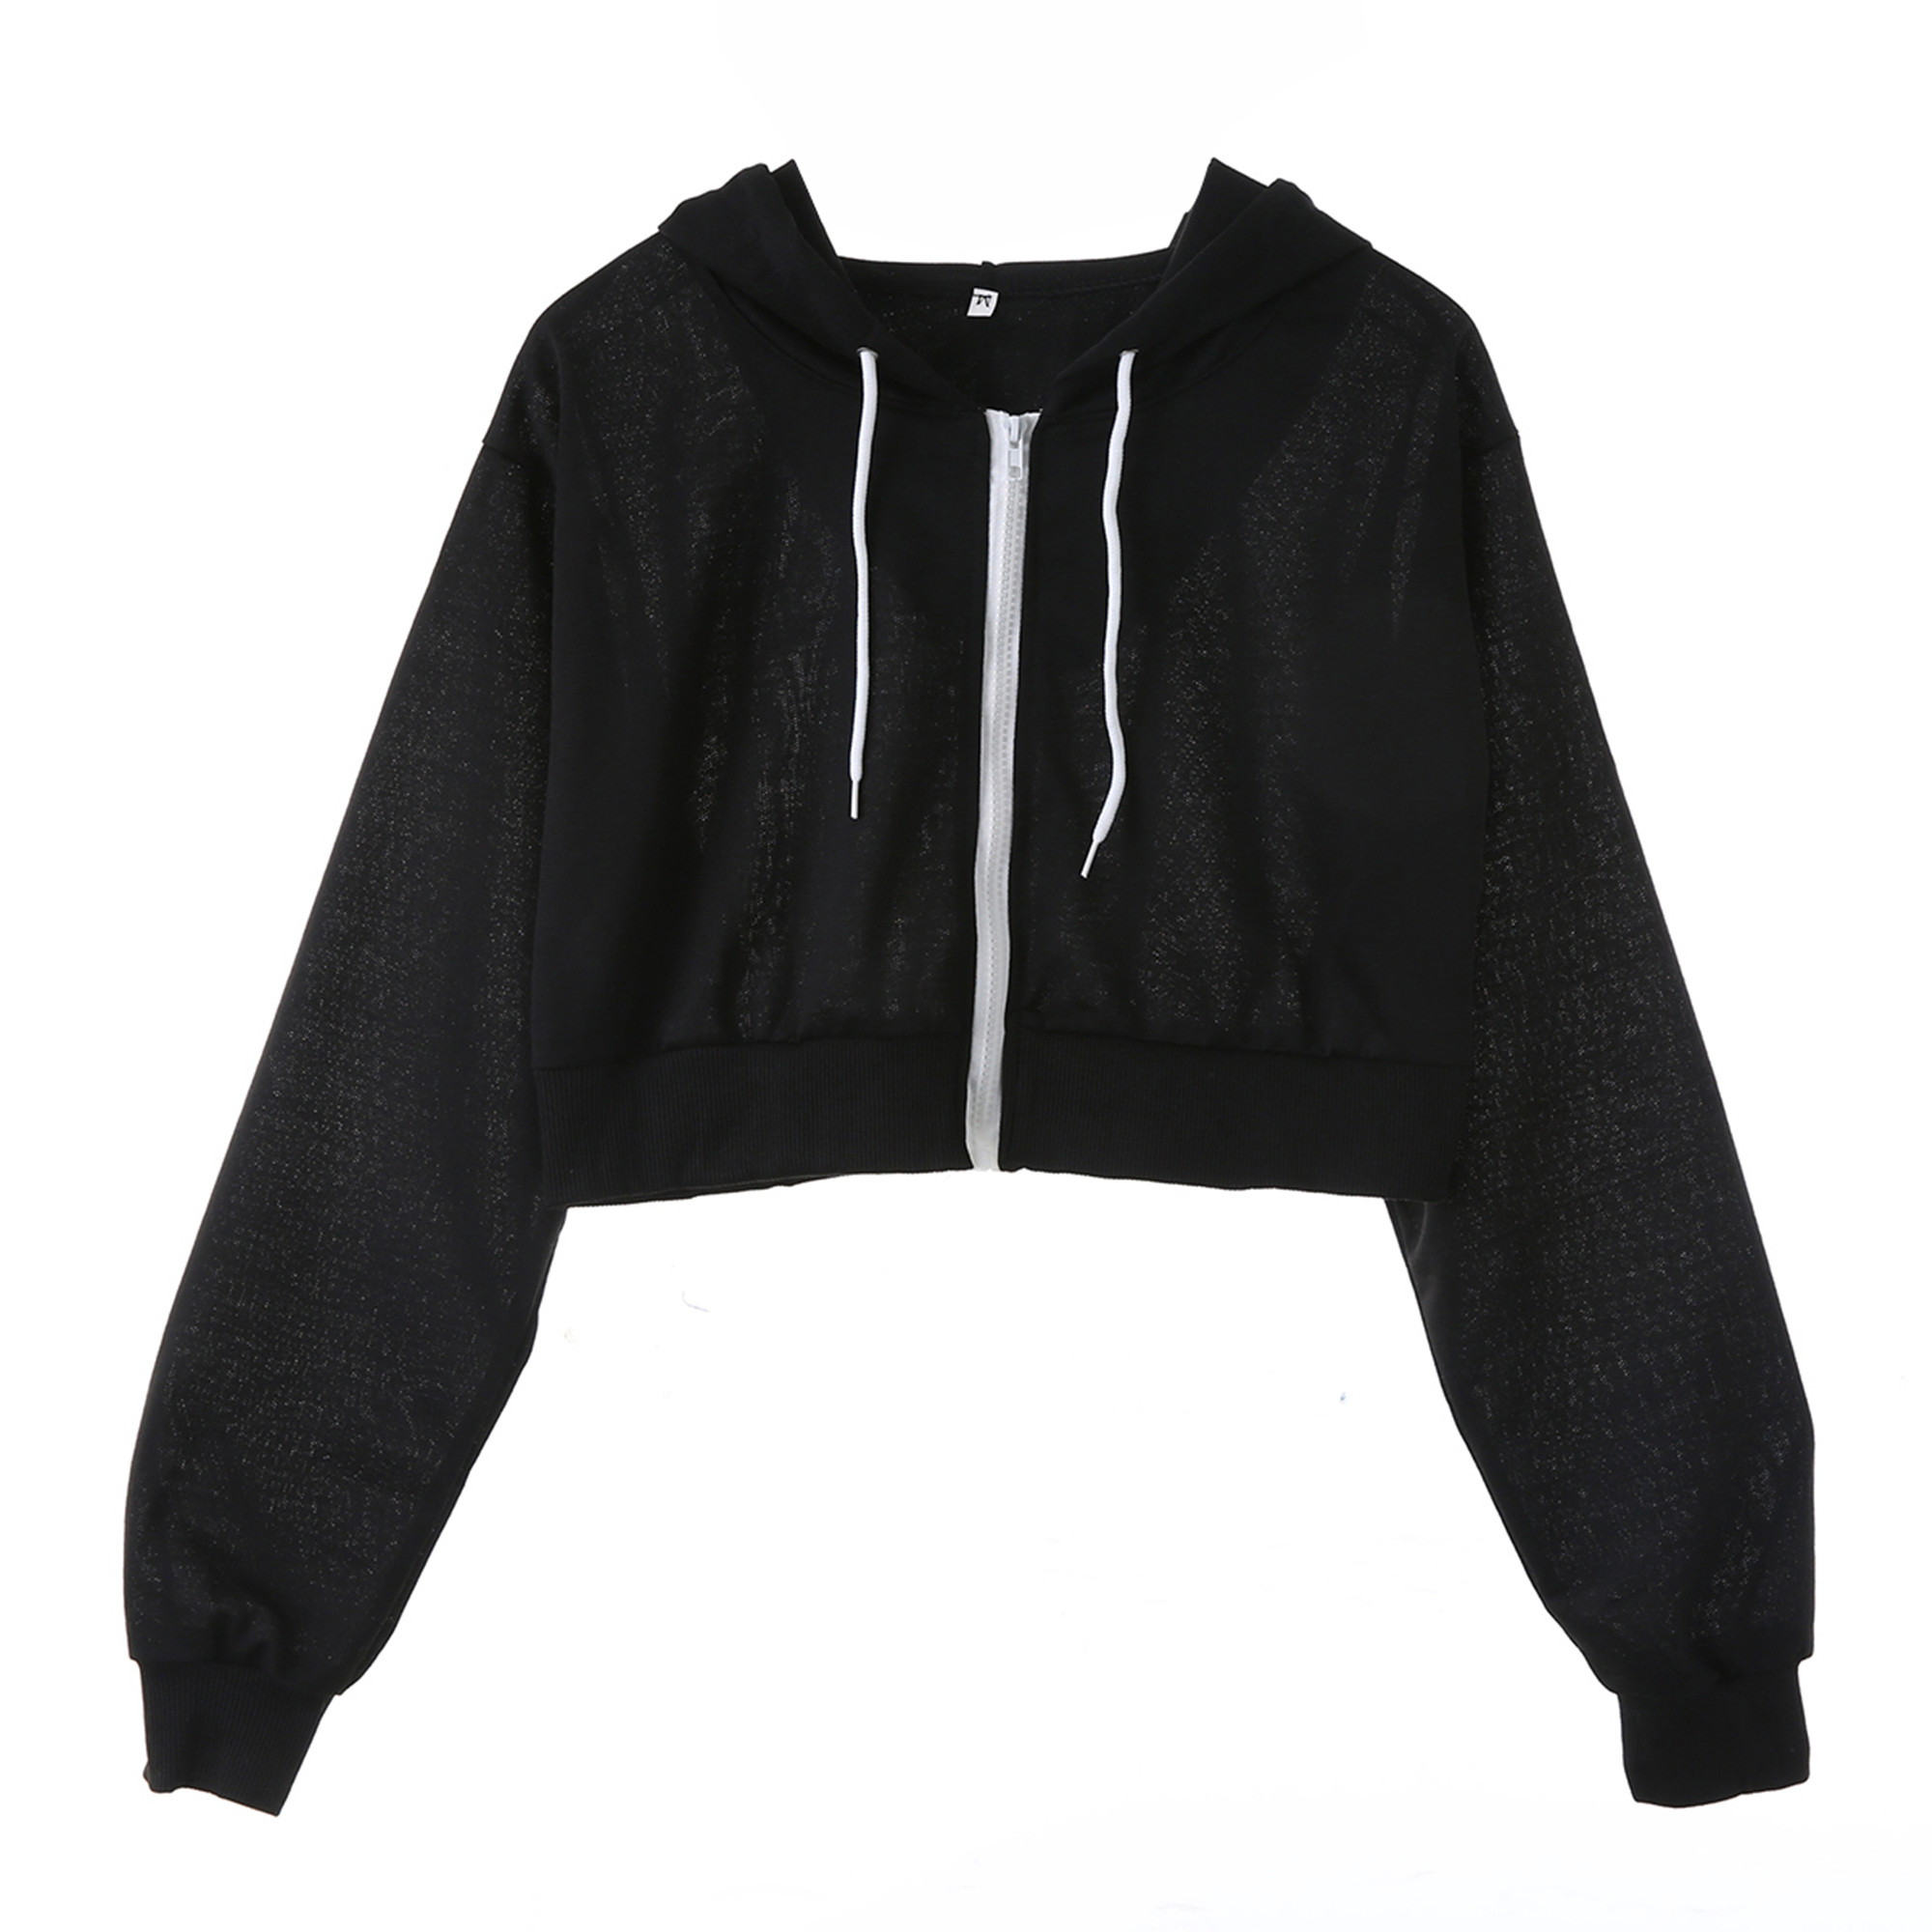 Forwelly Long Sleeve Crop Sweatshirt Hooded for Women Girl Fashion Solid Zip up Hoodie Casual Drawstring Tops